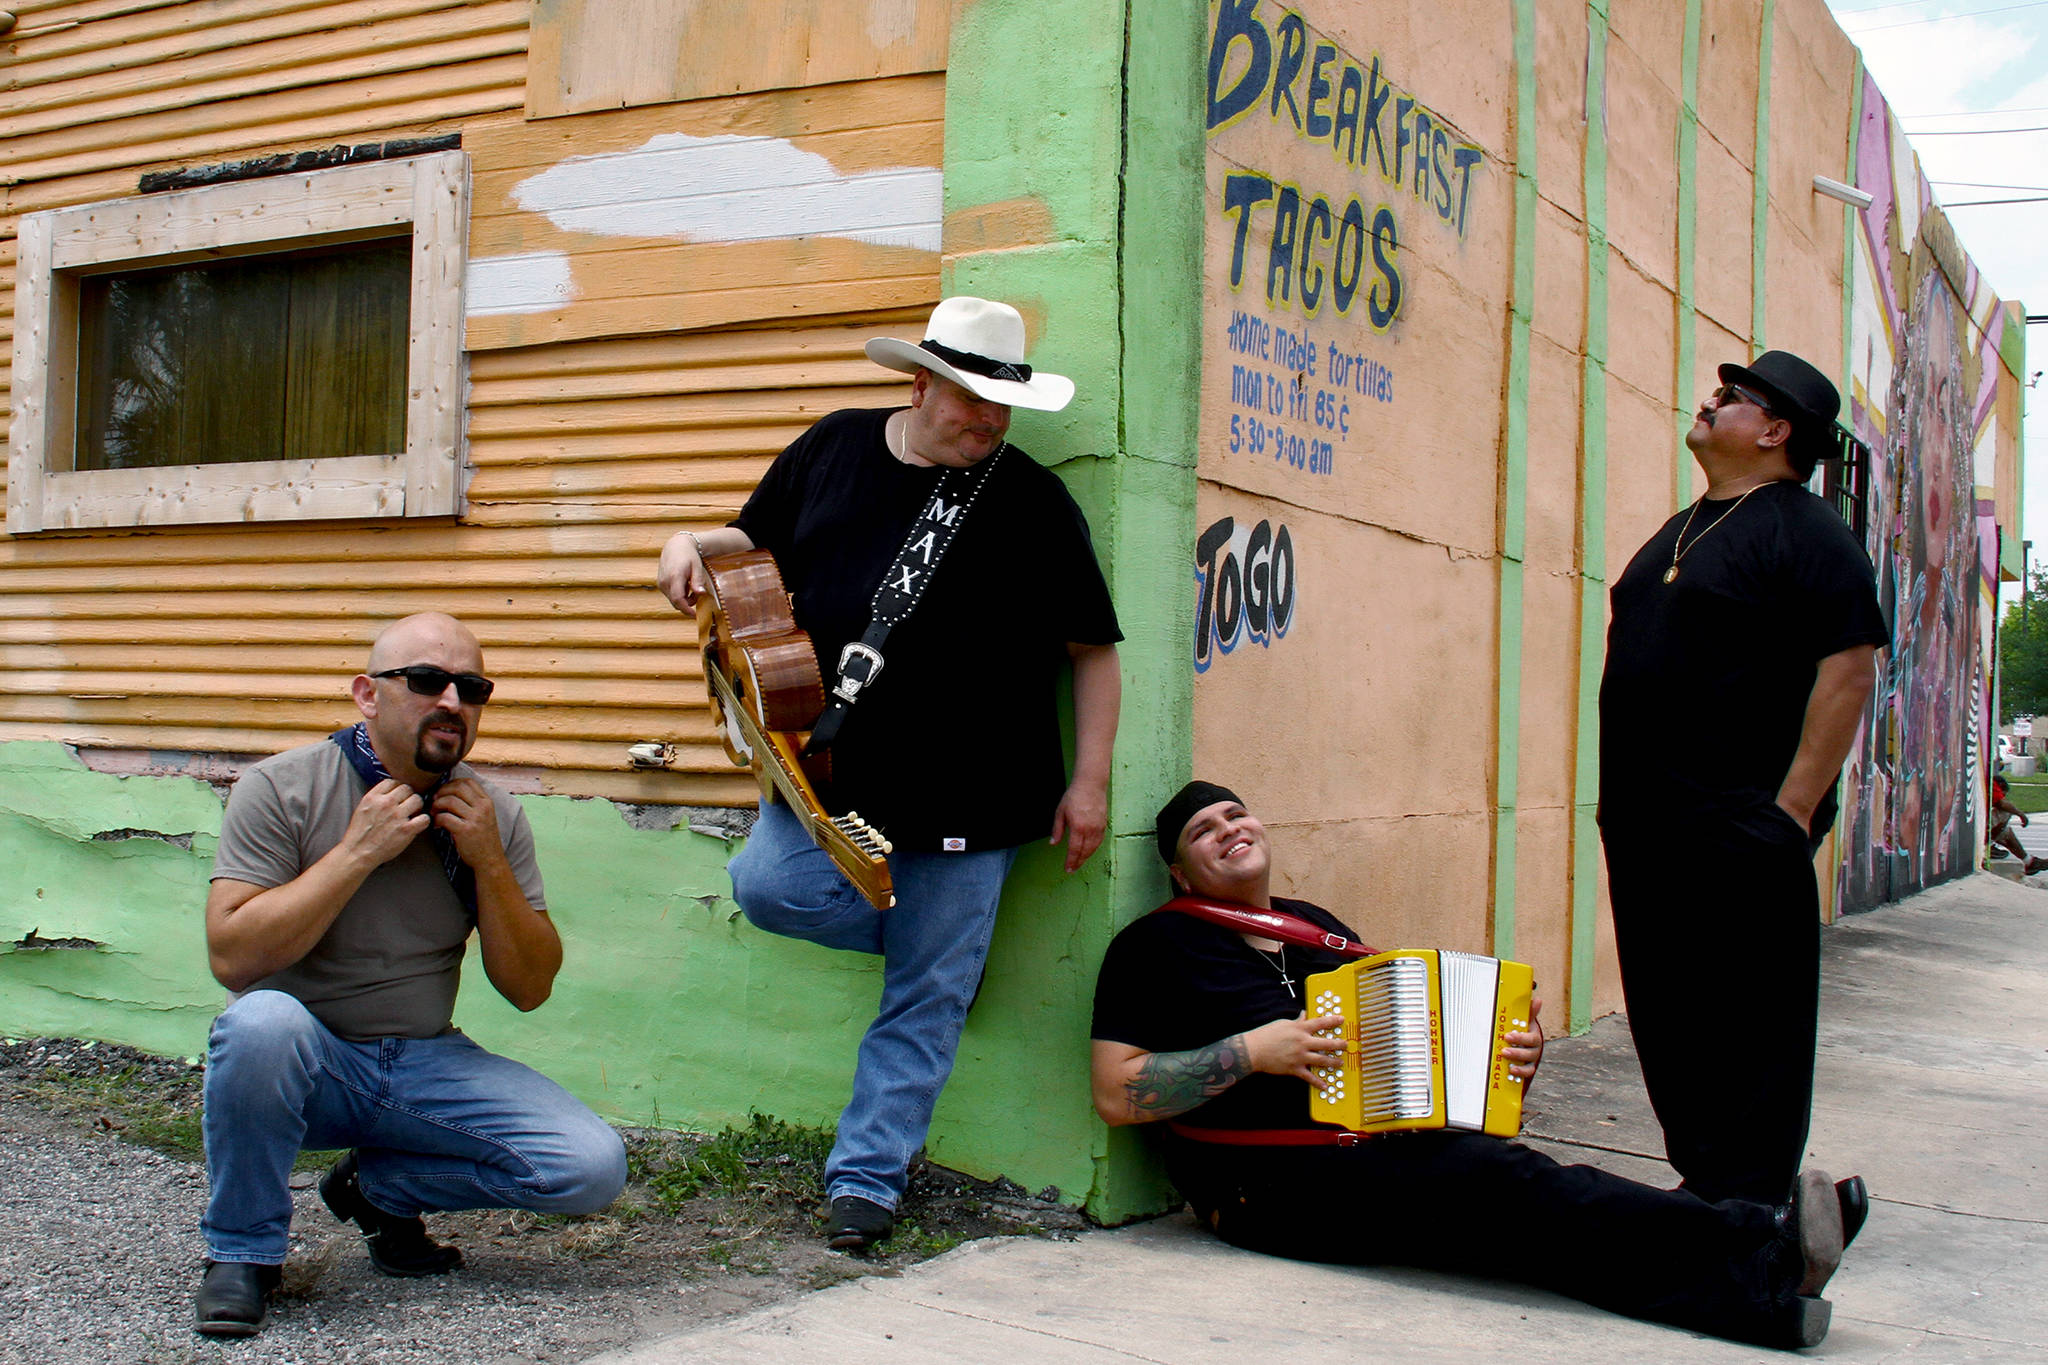 Los Texmaniacs, a conjunto quartet from San Antonio, Texas, will be be the guest artists at this year’s Alaska Folk Festival, which starts, Monday, April 8. The band has been nominated for multiple Grammy Awards and won one. (Courtesy Photo | Michael G. Stewart for Los Texmaniacs) (Courtesy Photo | For Los Texmaniacs)